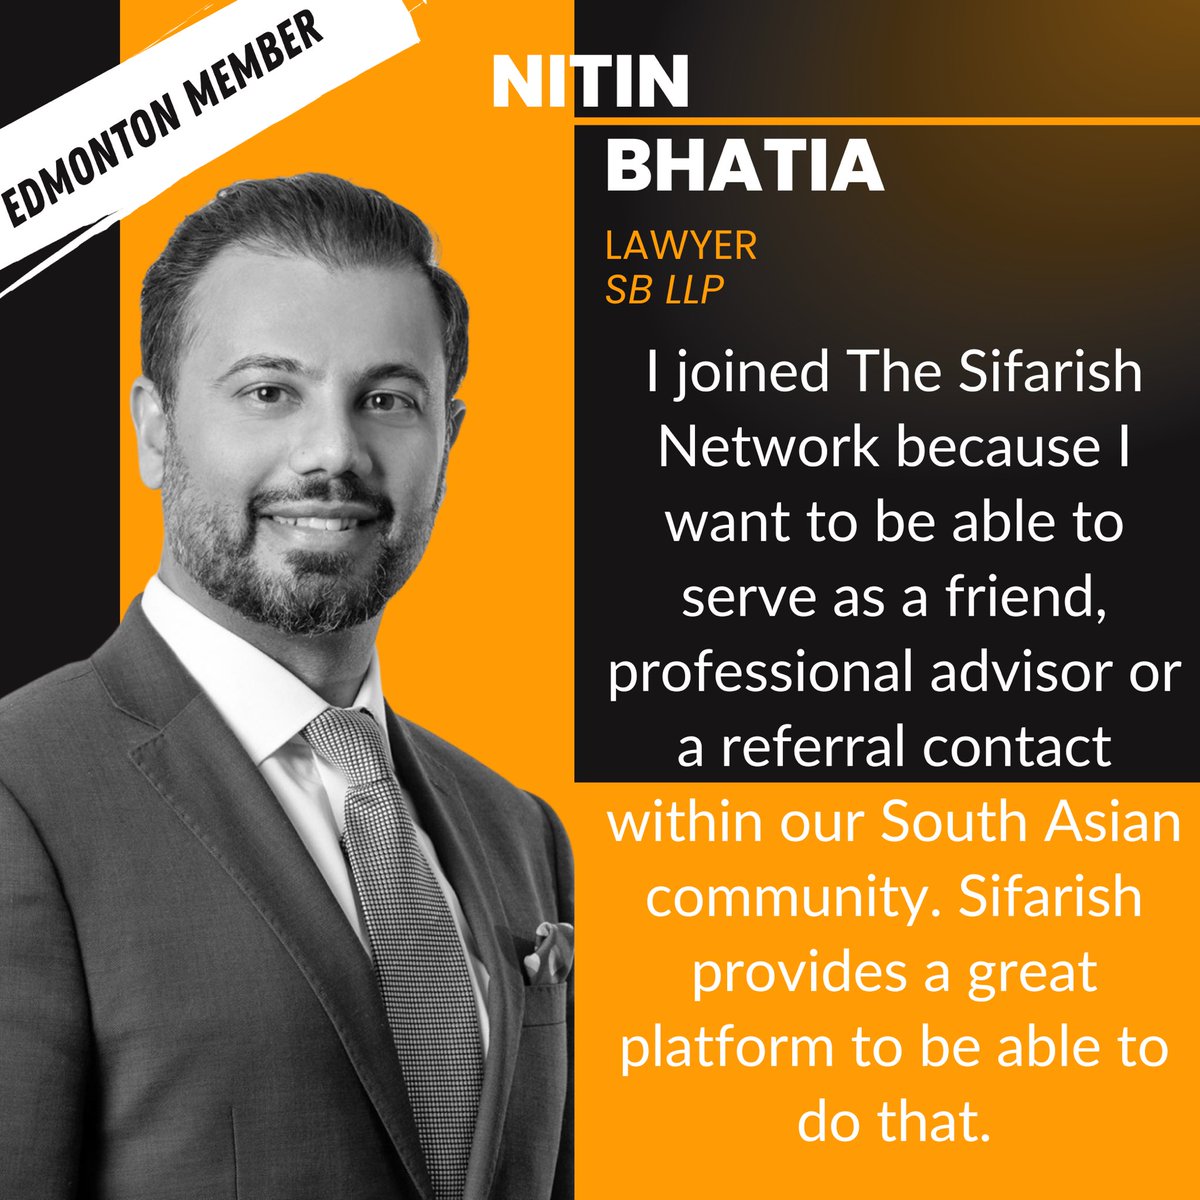 Welcome to this week’s #MembershipMonday ! This week, we feature Nitin Bhatia!

#sifarish #community #connection #collaboration #southasian #business #professional #lawyer #legalcareer #commercialrealestate #mortgagefinancing #litigation #familylitigation #personallitigation